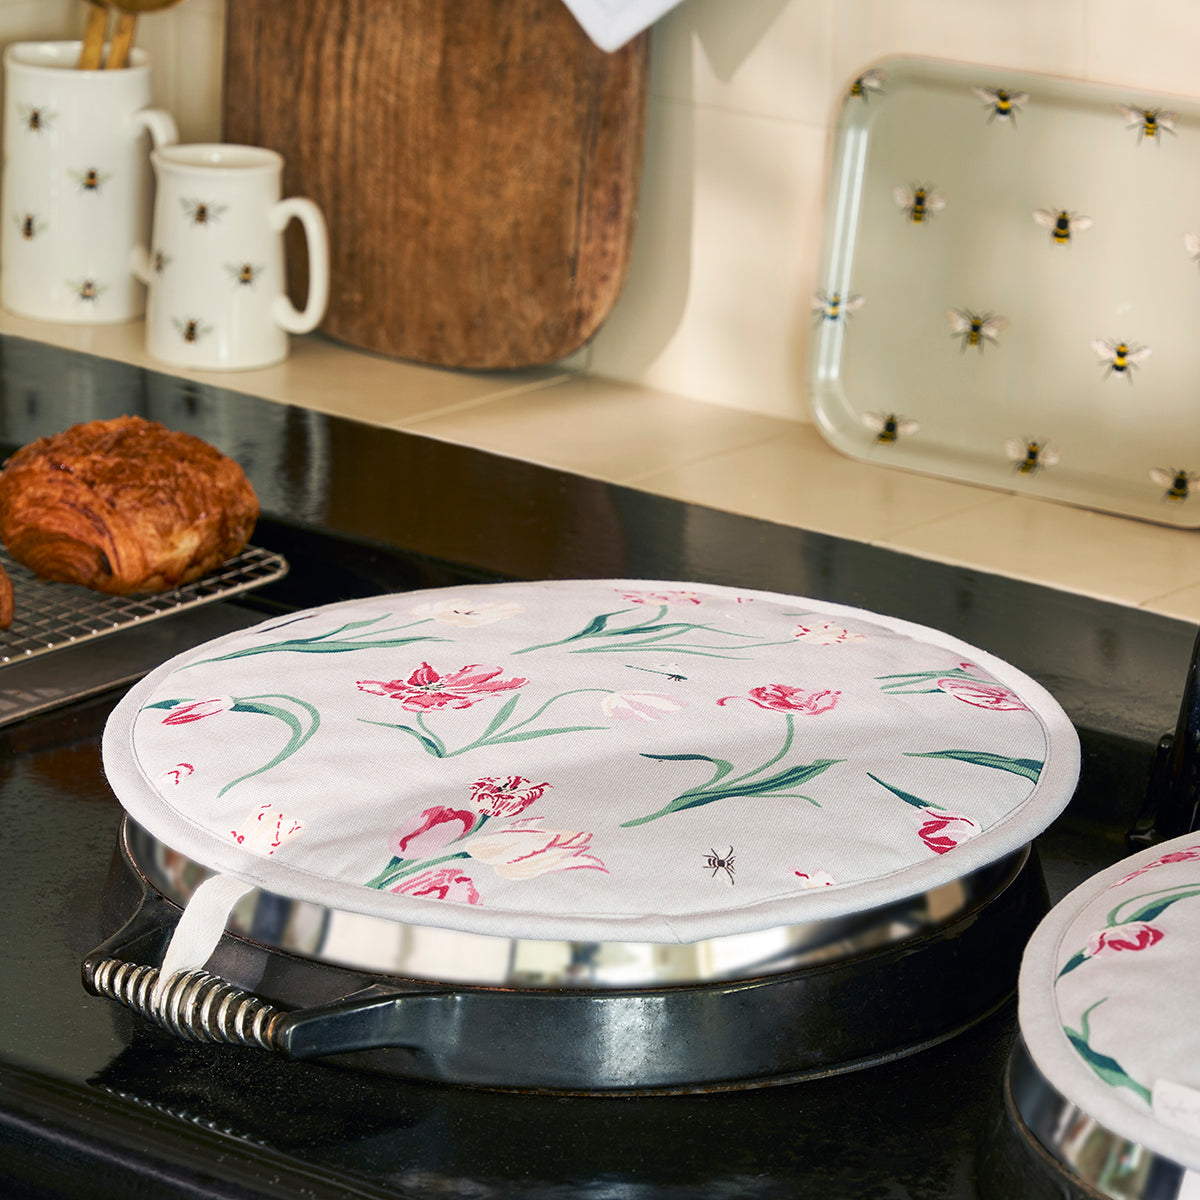 Sophie Allport "Tulip" Chefs Pad For Use With Aga Range Cookers